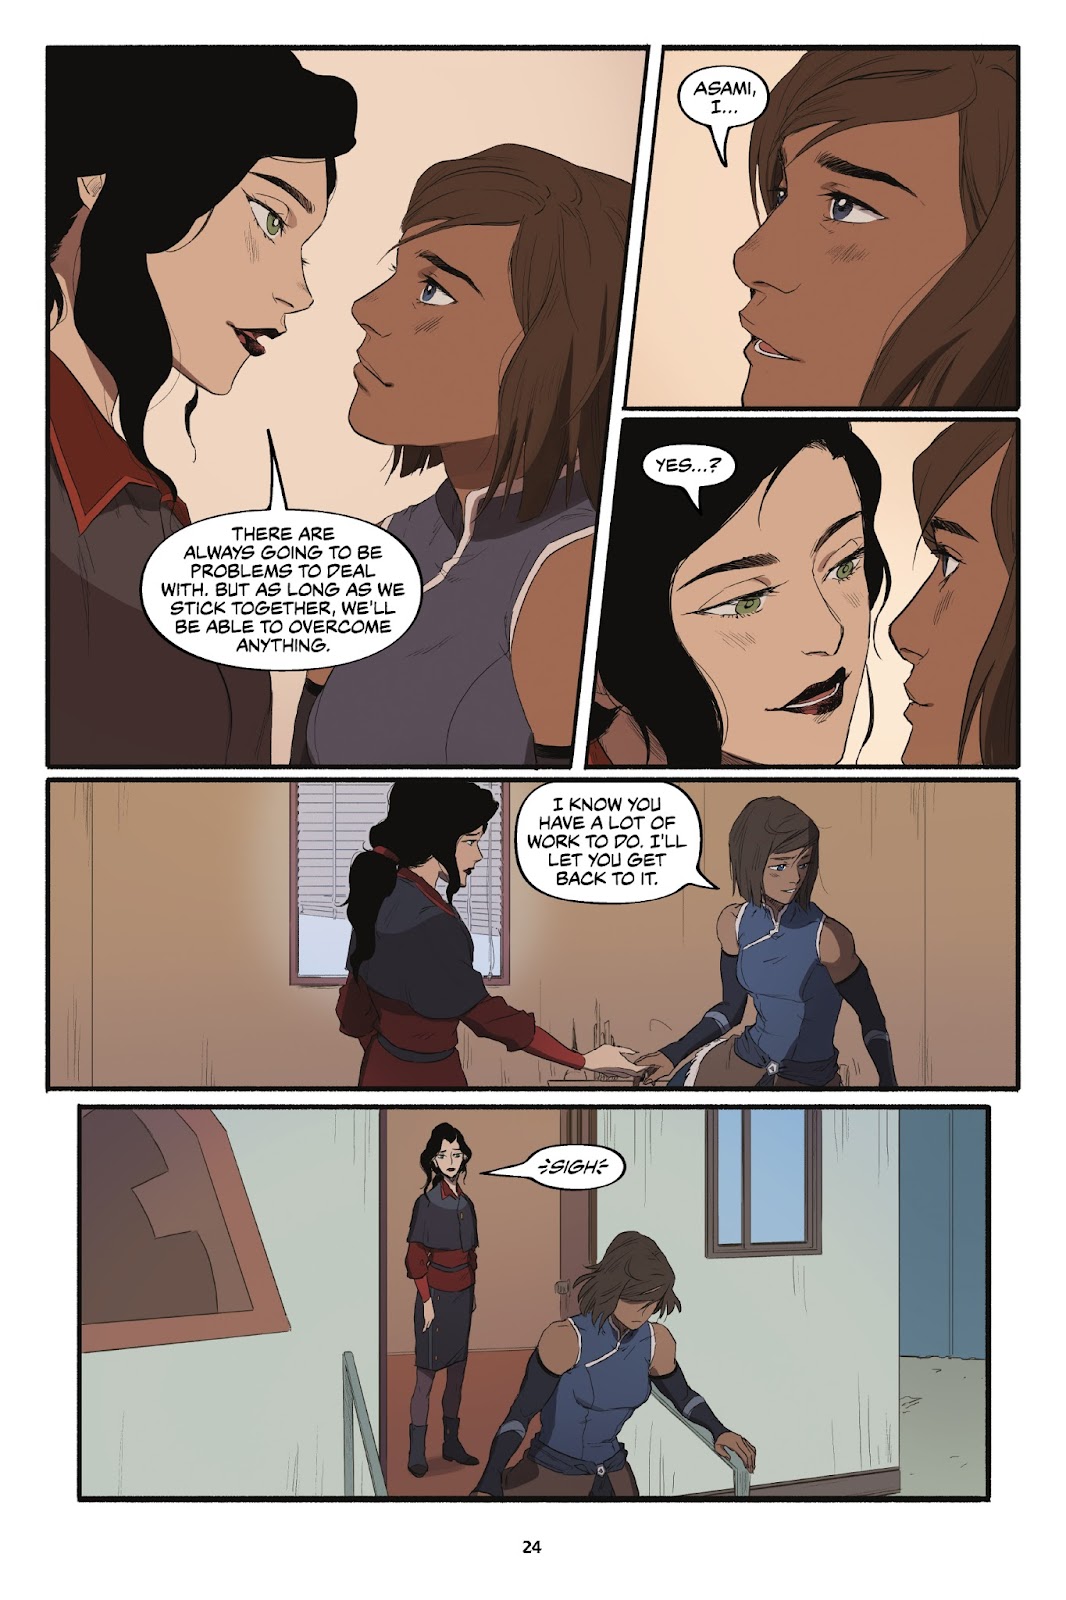 Nickelodeon The Legend of Korra – Turf Wars issue 2 - Page 26